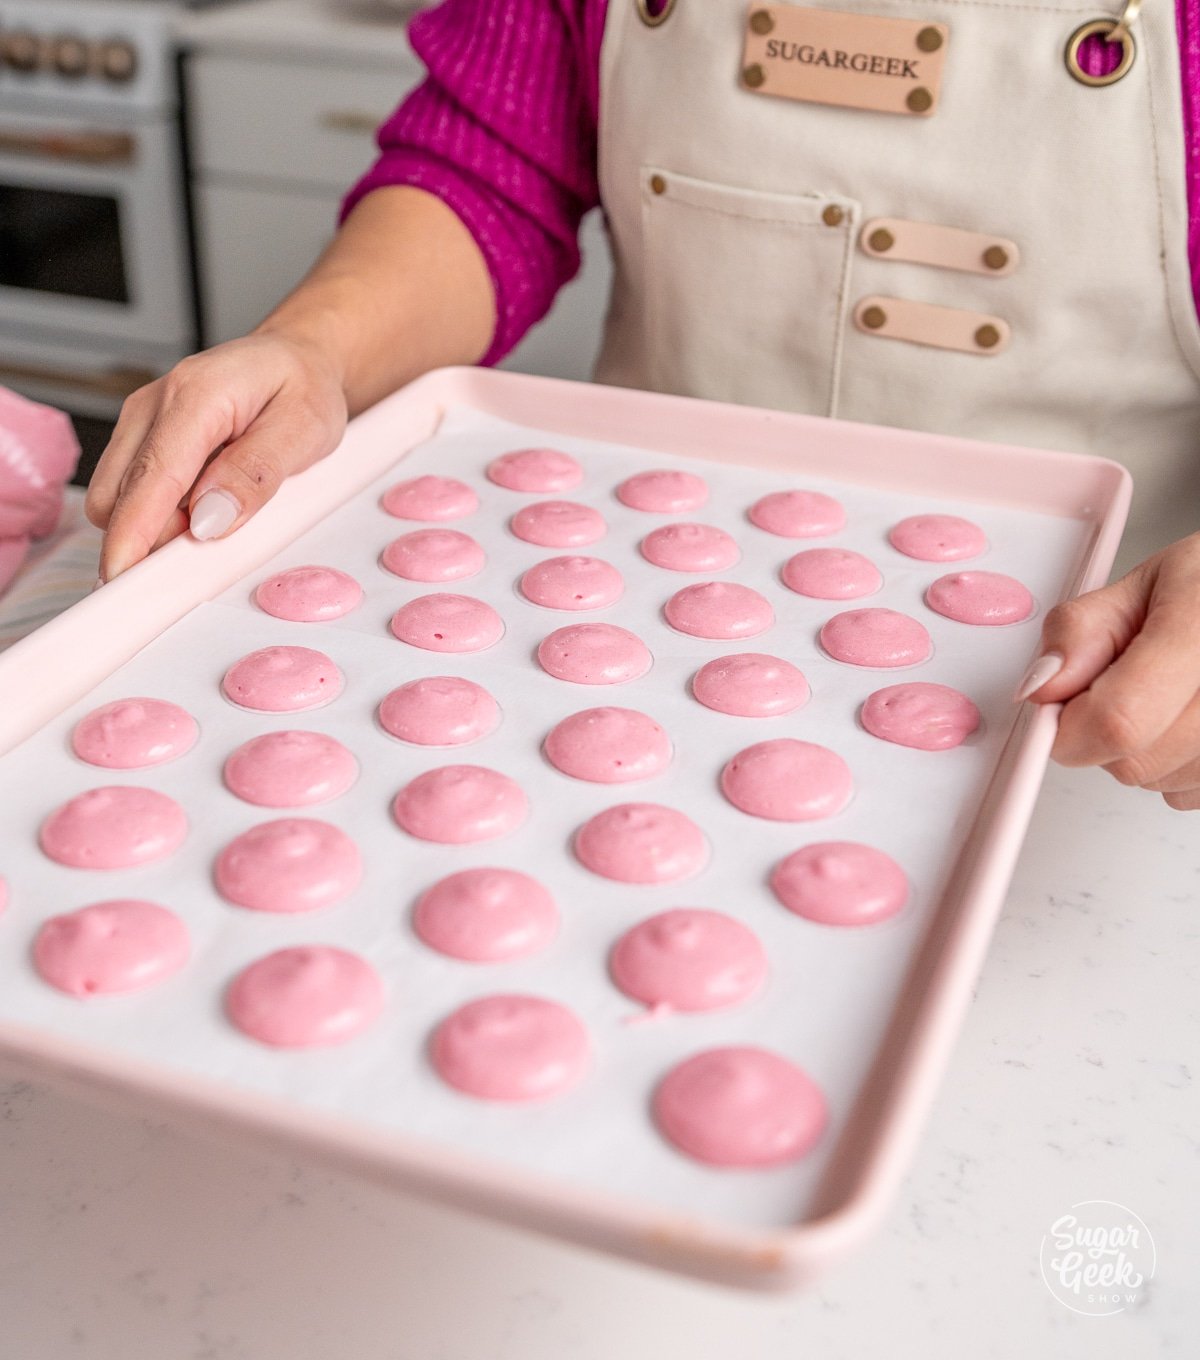 hands holding a baking sheet of unbaked macarons 6" above a table